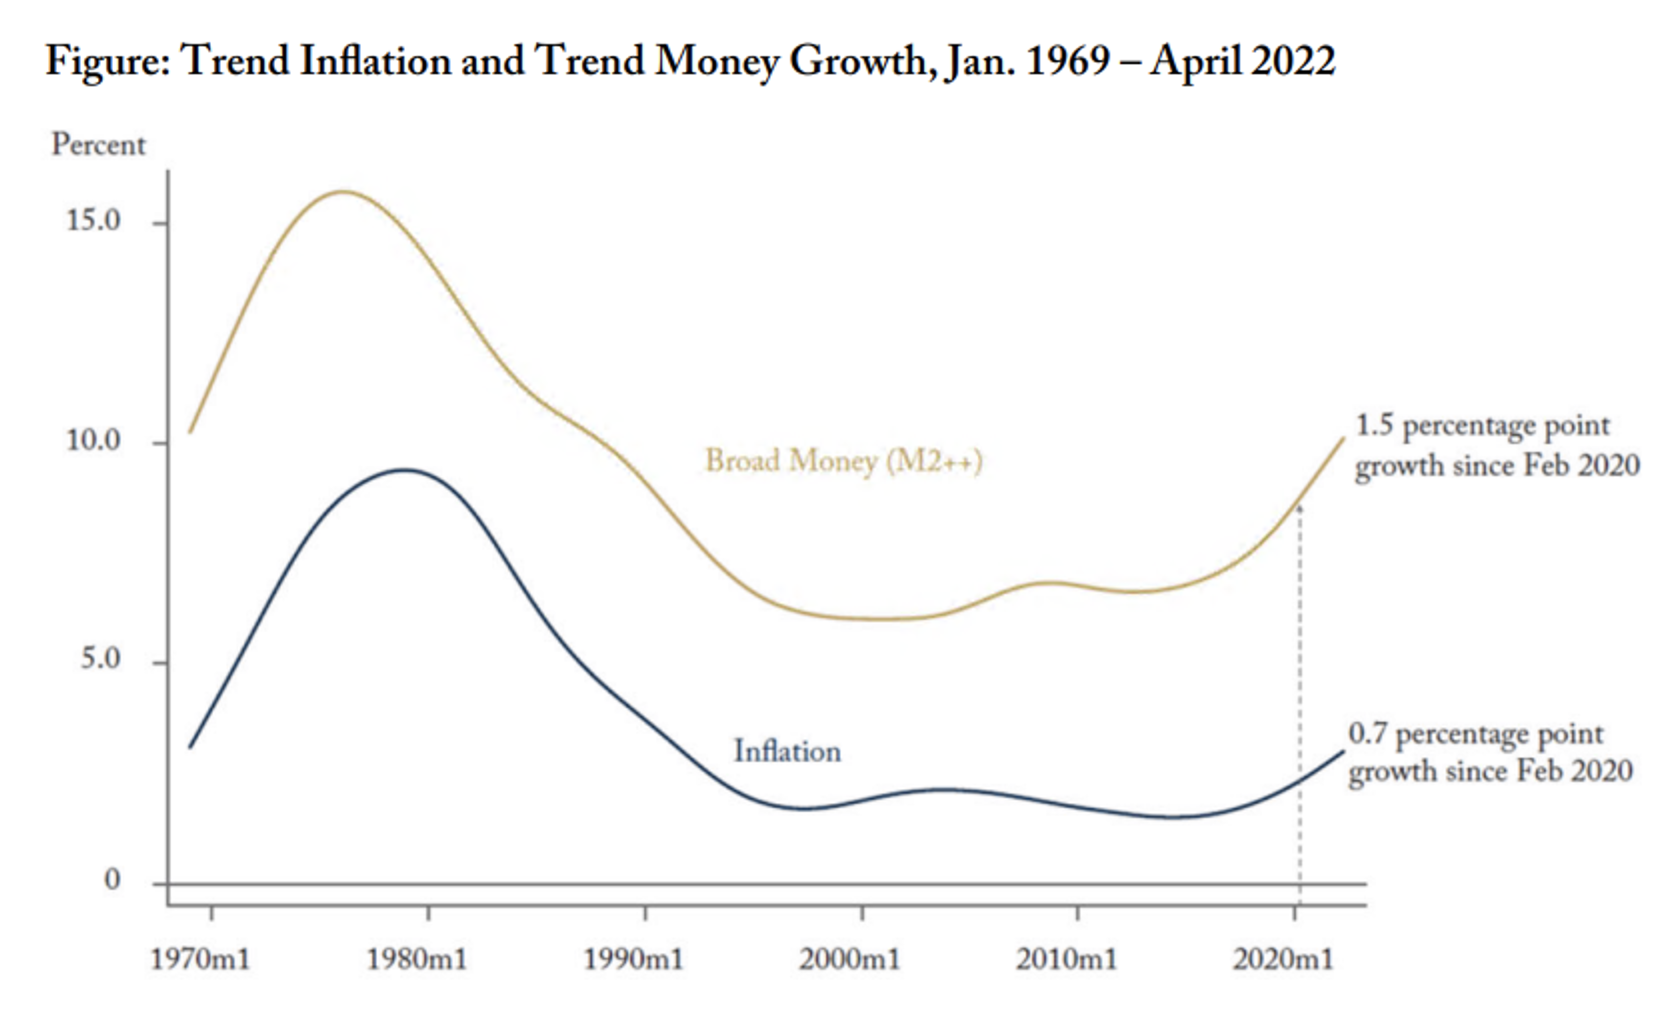 Figure: Trend Inflation and Trend Money Growth, Jan. 1969 - April 2022